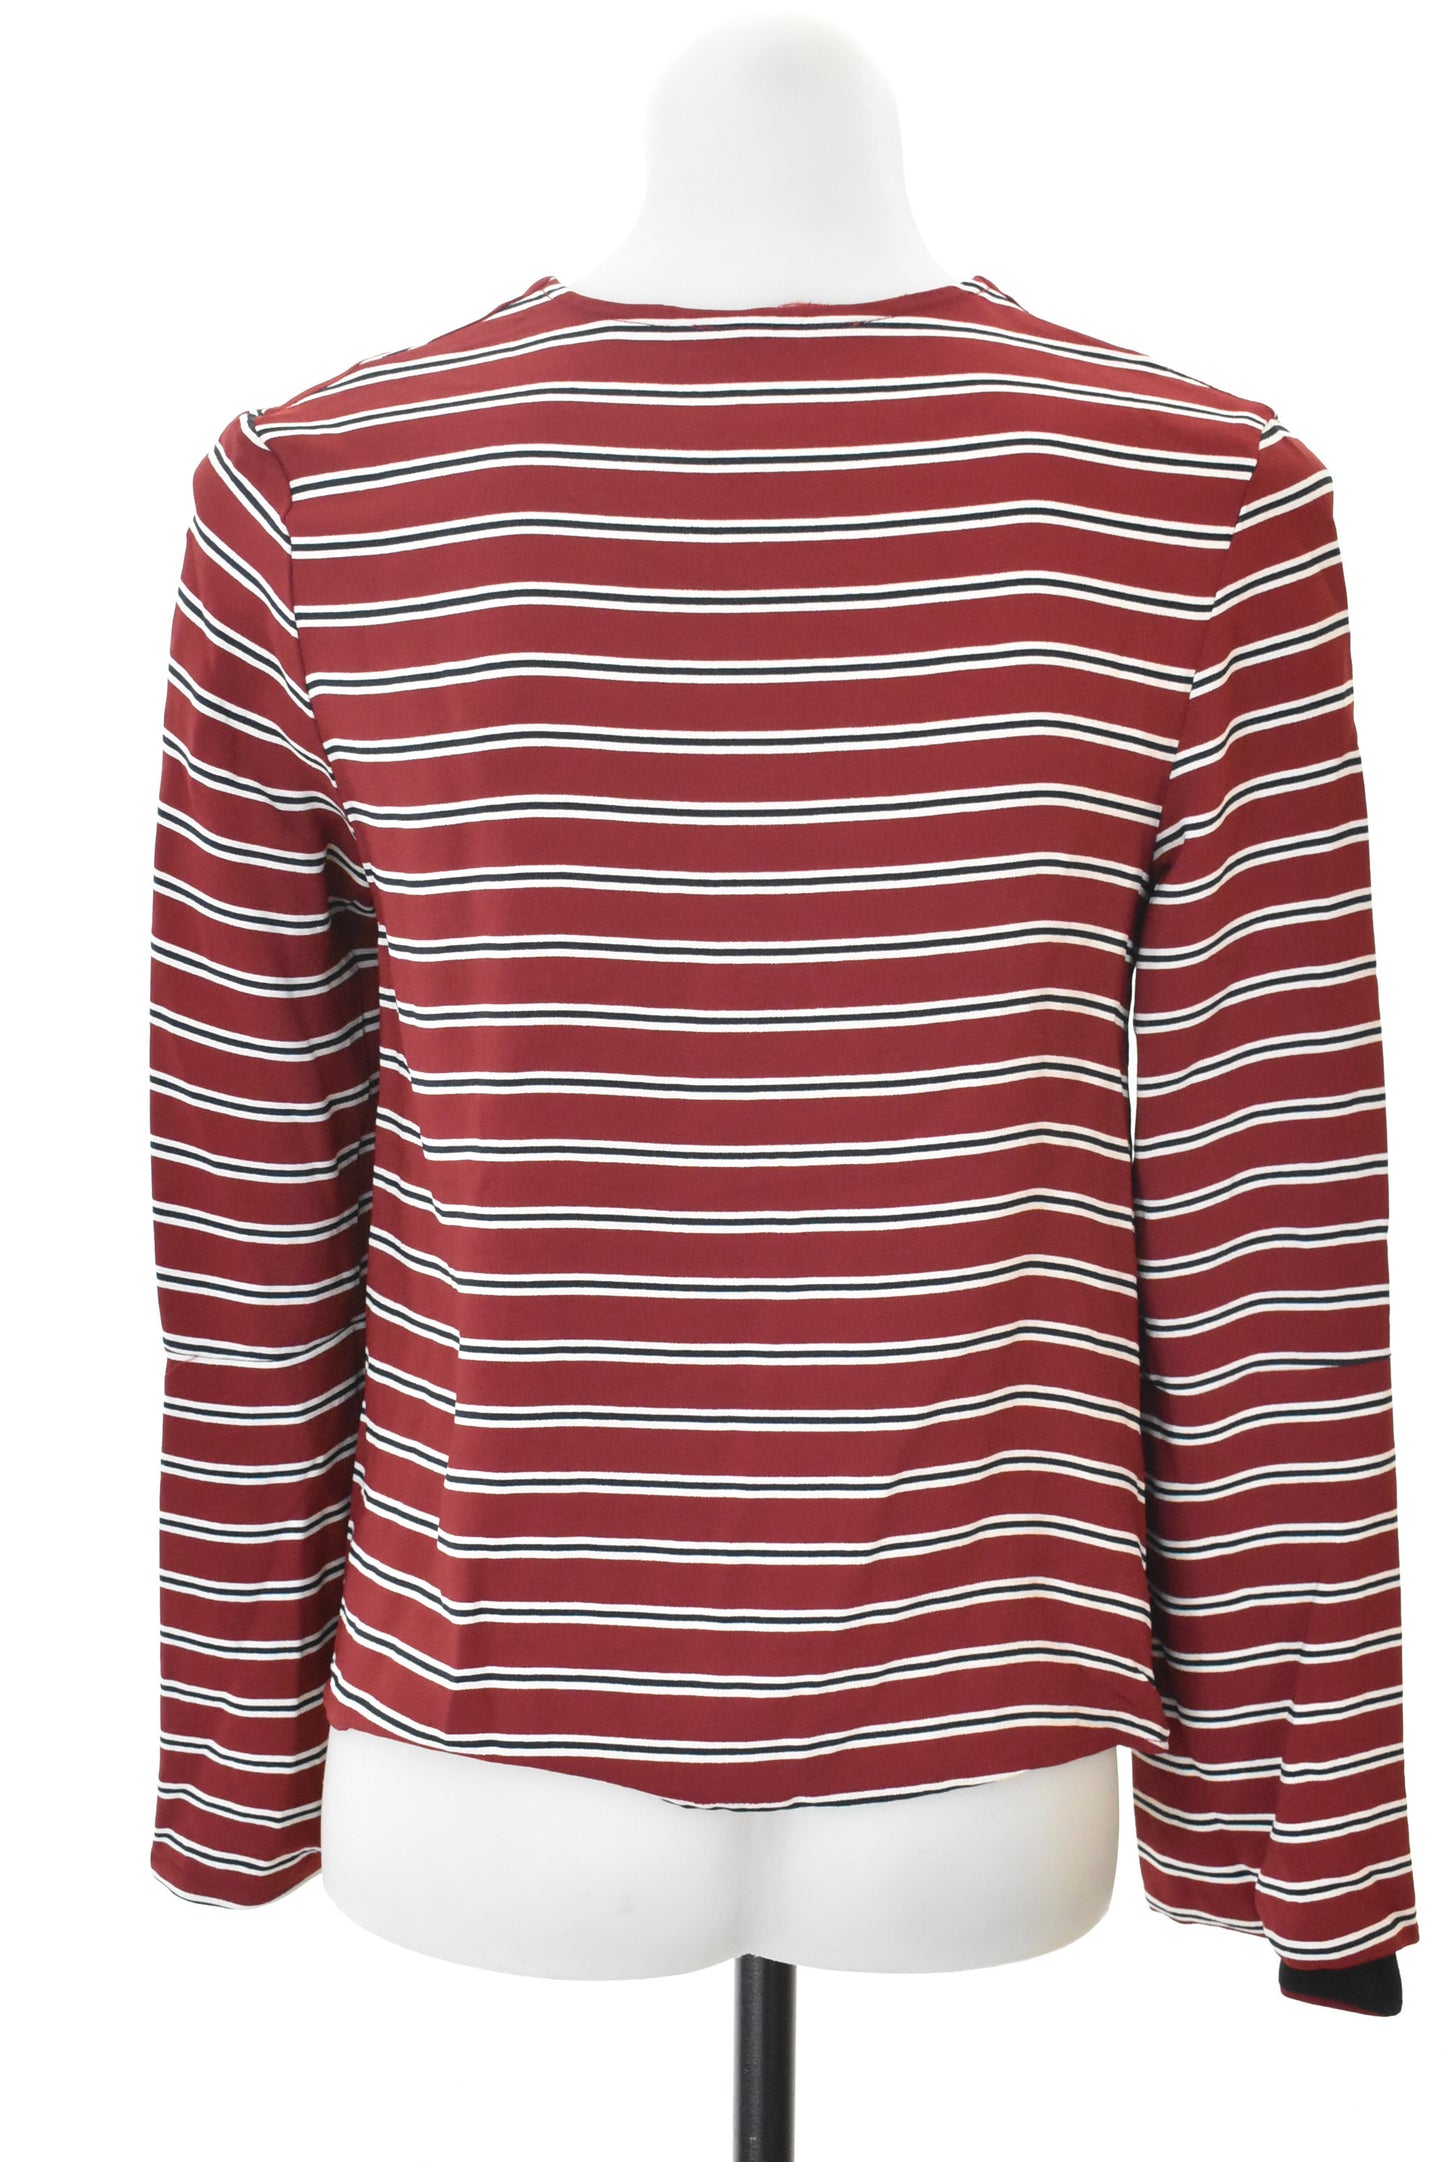 Cue stripy top with bow, 8